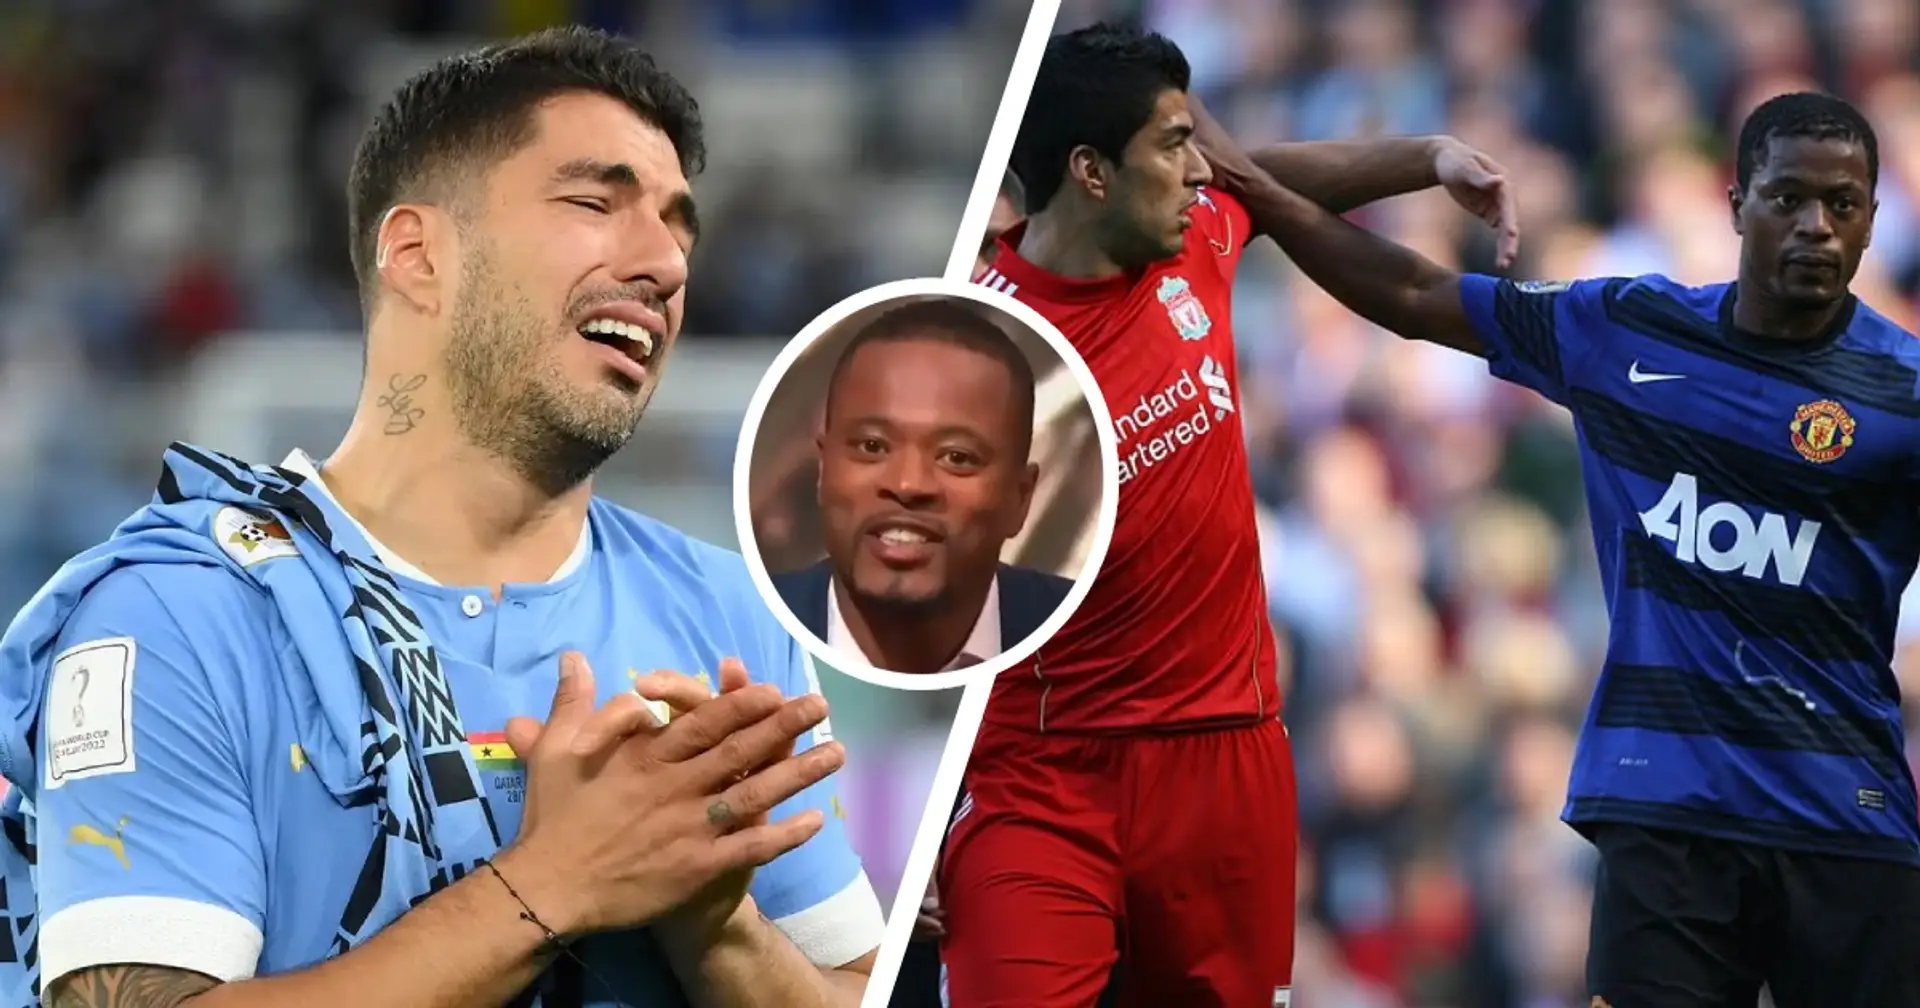 Evra likes photo of tearful Suarez after Uruguay's World Cup exit 